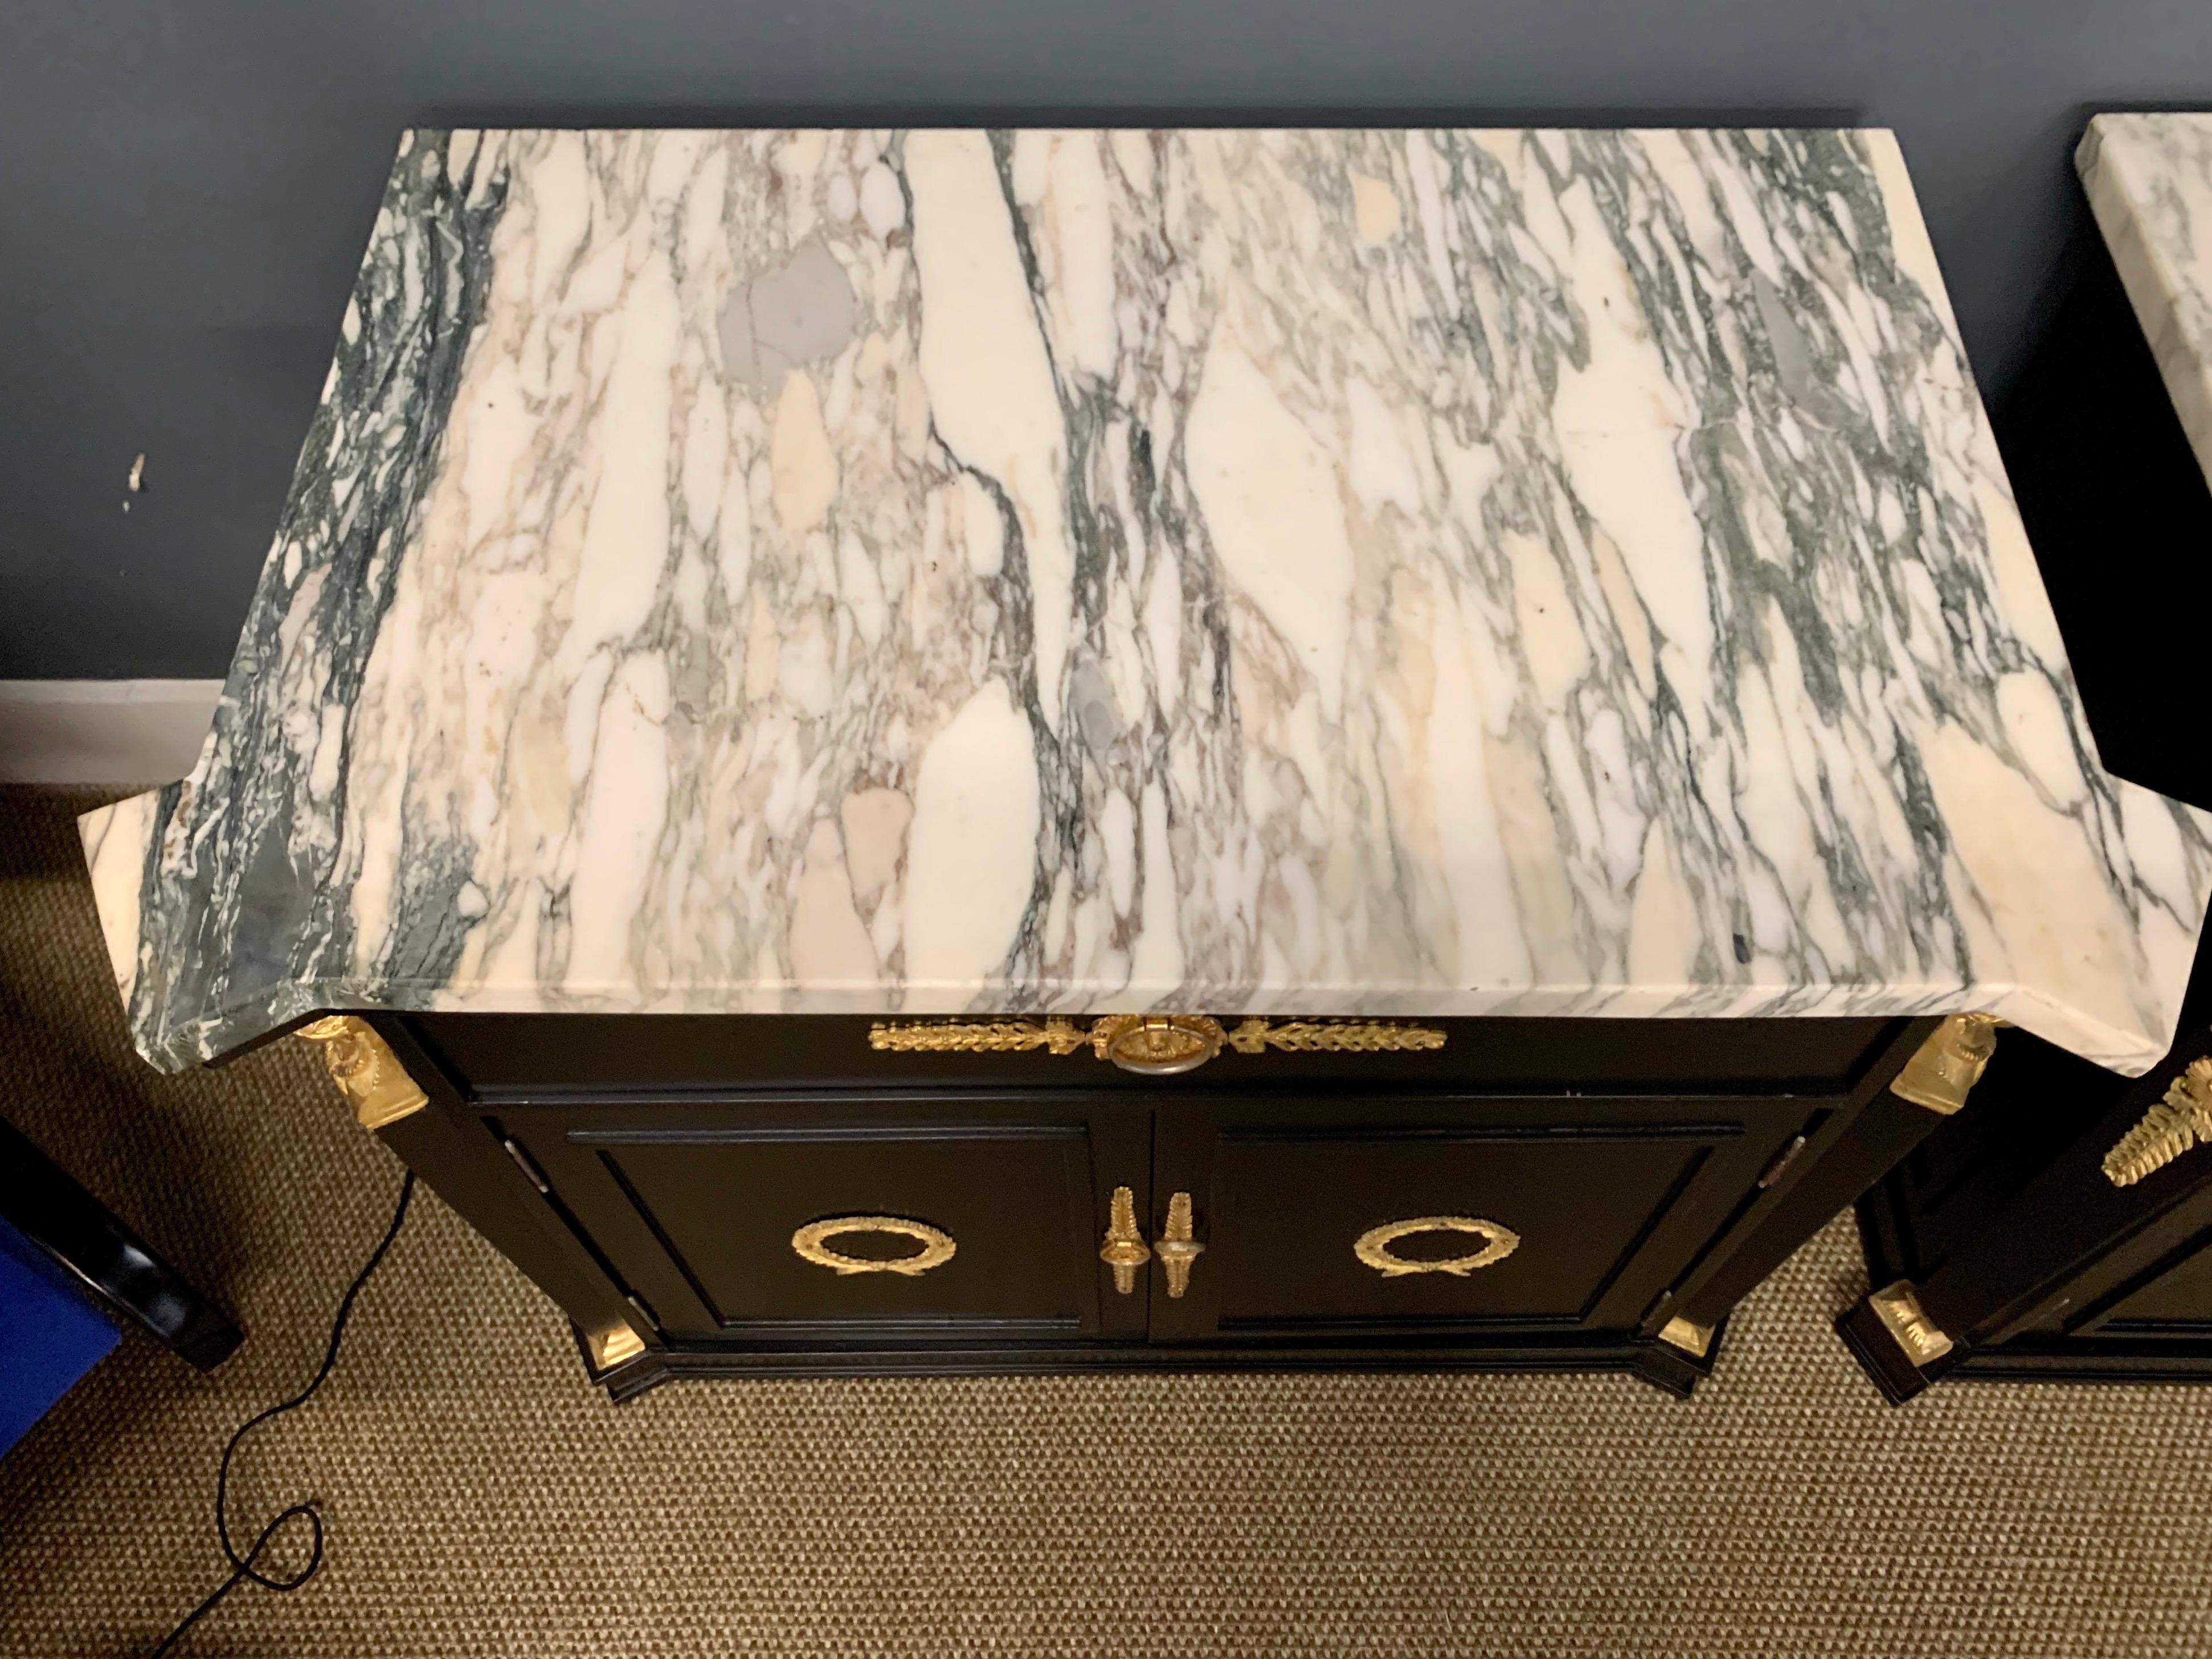 This gorgeous matching set of neoclassical tables have been newly lacquered in black and feature marble tops which are original, one shelf inside each, and green felt for your valuables. The black and gold color scheme makes a great statement in